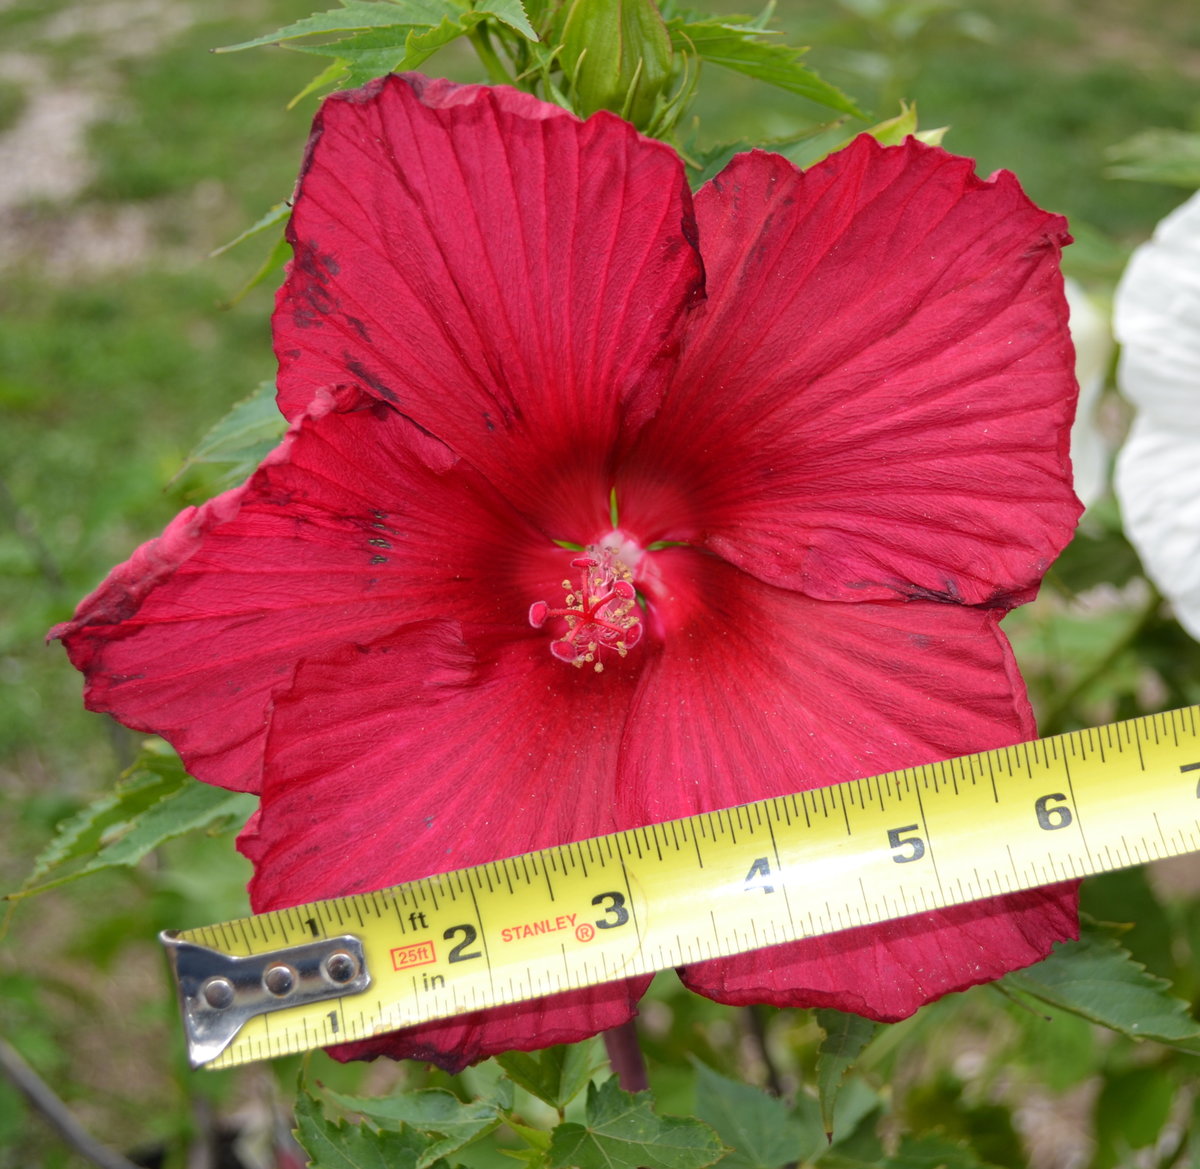 Lord Baltimore Dinner Plate Hibiscus.